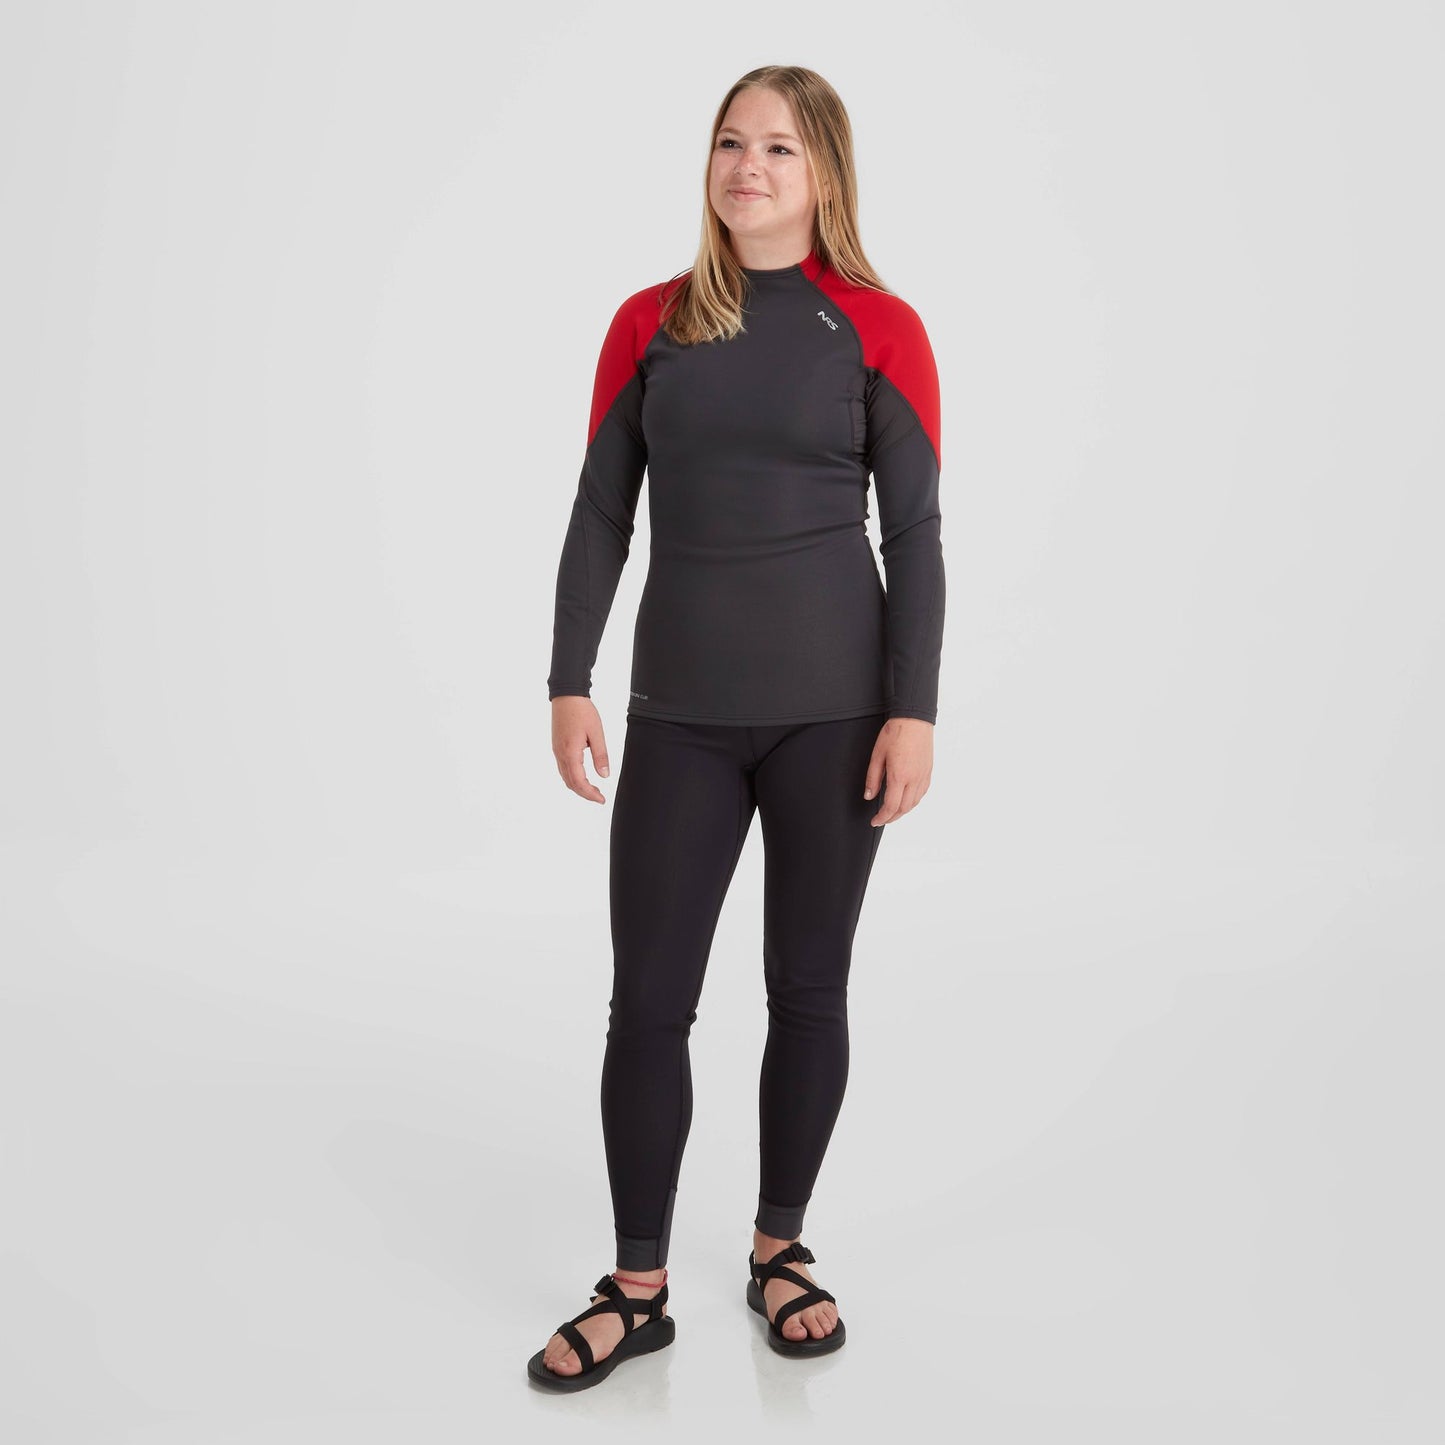 A girl wearing a black and red NRS Hydroskin 0.5 Long Sleeve Shirt - Women's, an insulating top, as part of her layering arsenal.